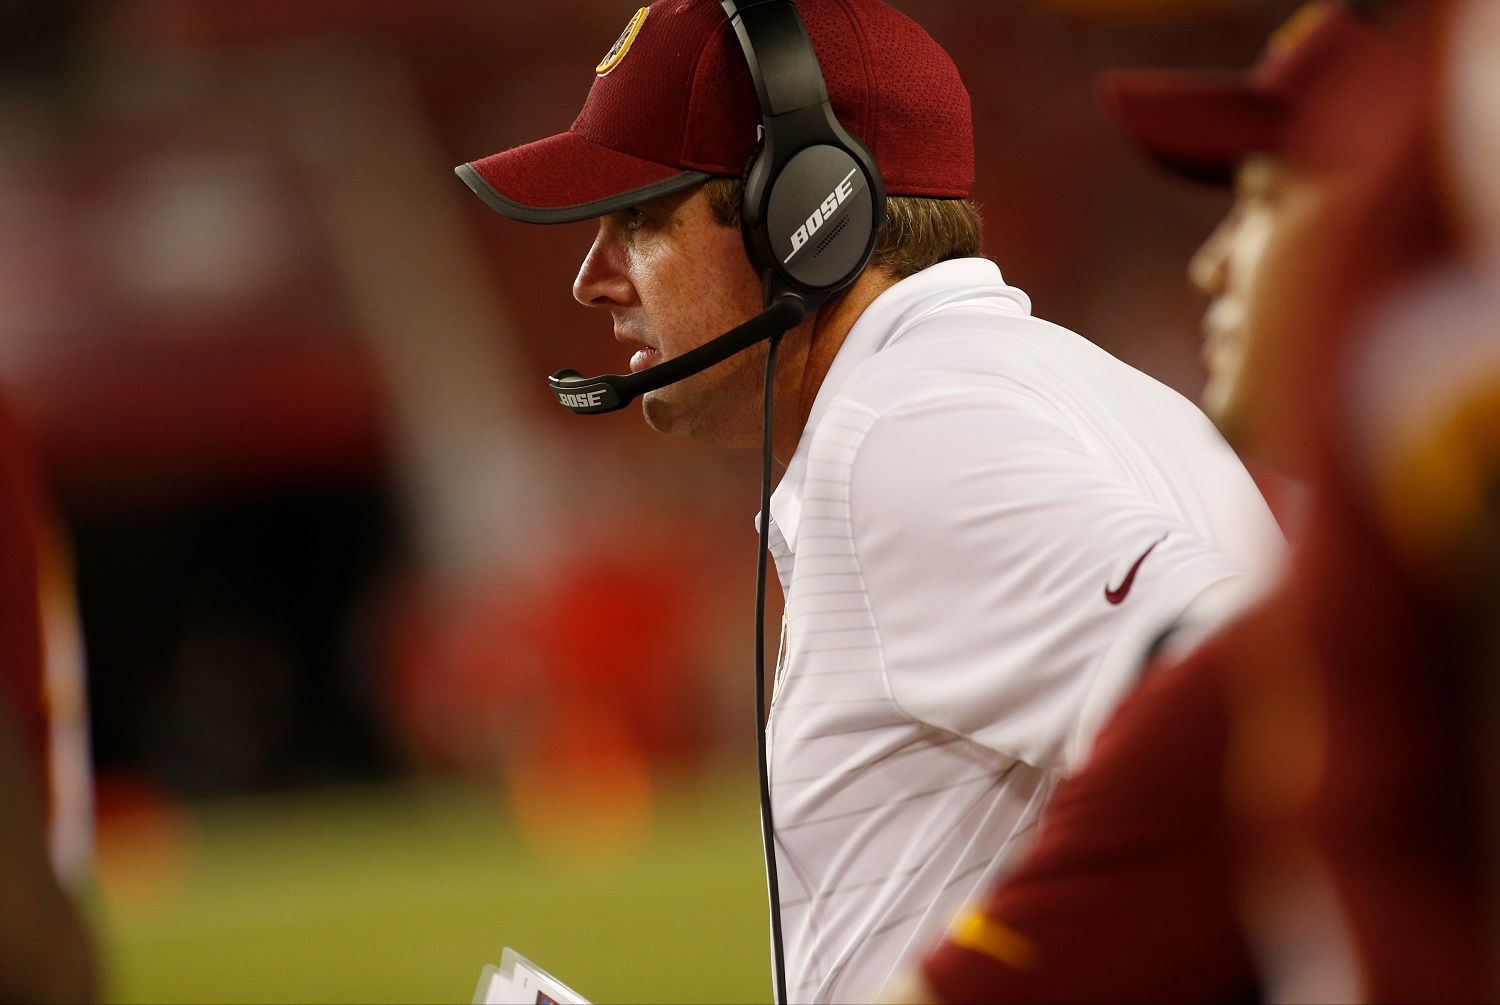 TAMPA, FL - AUGUST 31:  Head coach Jay Gruden of the Washington Redskins looks on from the sidelines during the second quarter of an NFL preseason football game against the Tampa Bay Buccaneers on August 31, 2017 at Raymond James Stadium in Tampa, Florida. (Photo by Brian Blanco/Getty Images)